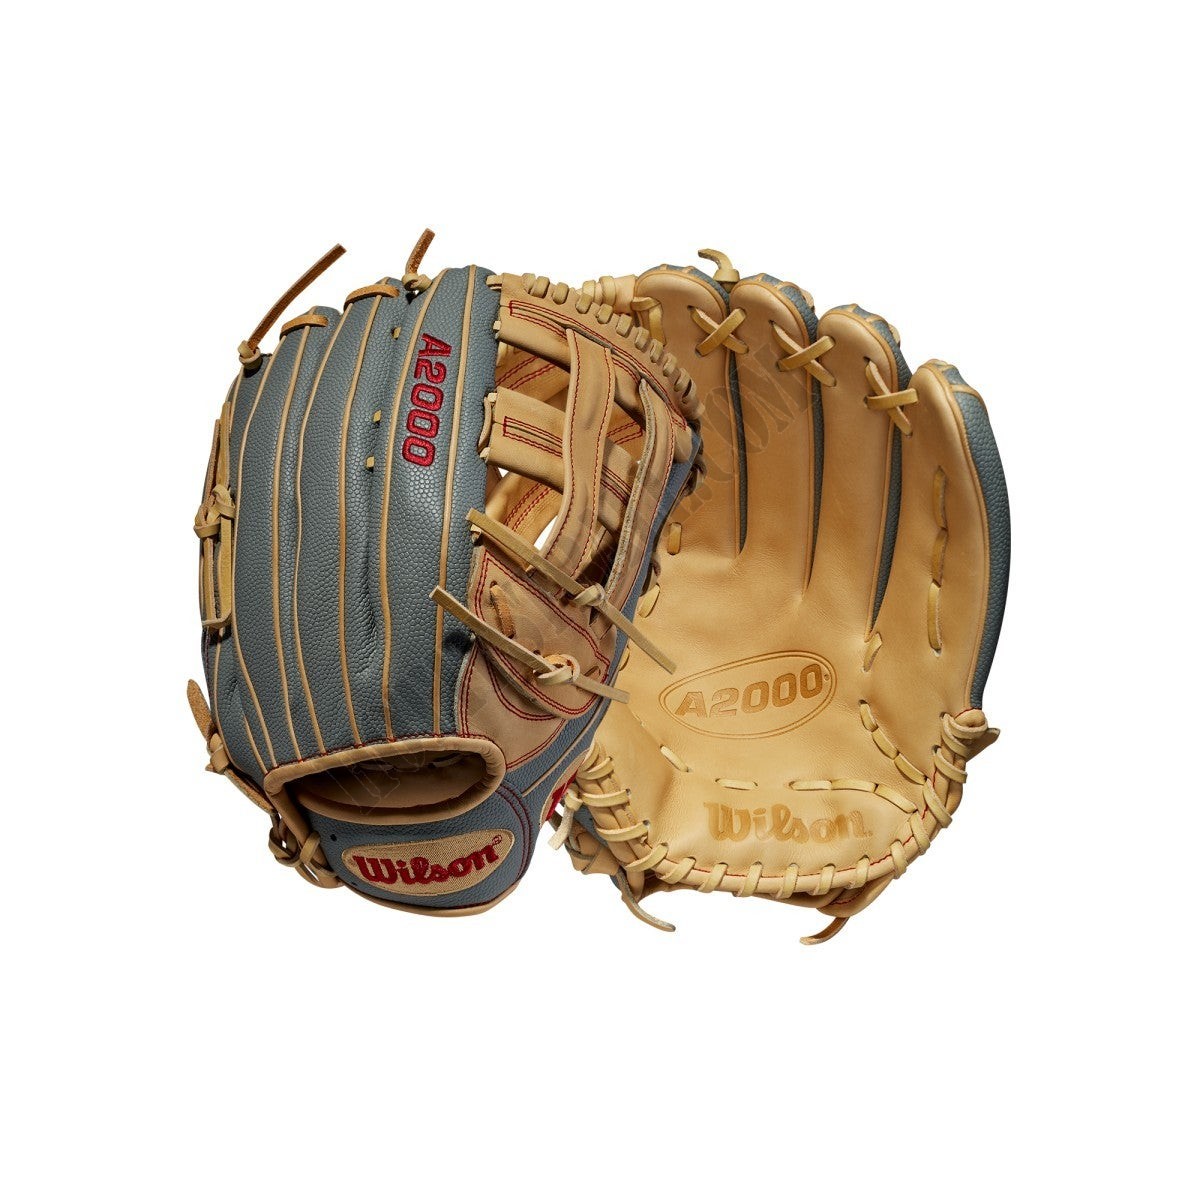 2020 A2000 1799SS Outfield Baseball Glove - Limited Edition ● Wilson Promotions - 2020 A2000 1799SS Outfield Baseball Glove - Limited Edition ● Wilson Promotions